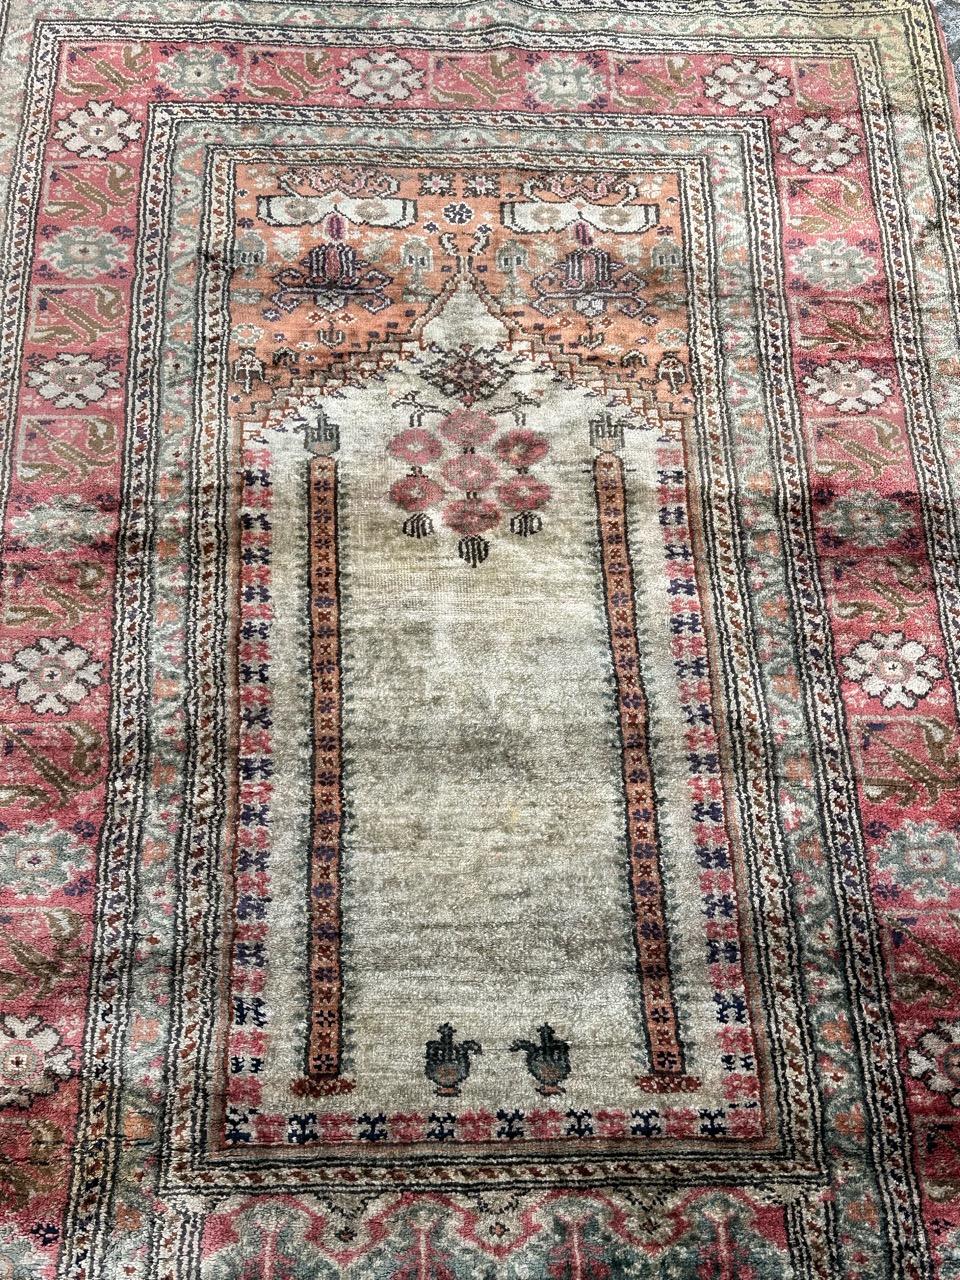 Pretty mid century Turkish Cesareh rug with beautiful mihrab design showing an entrance with columns and the stylized decorations and flowers, surrounding it. With nice light colours with a light green, orange, pink and grey. Entirely hand knotted